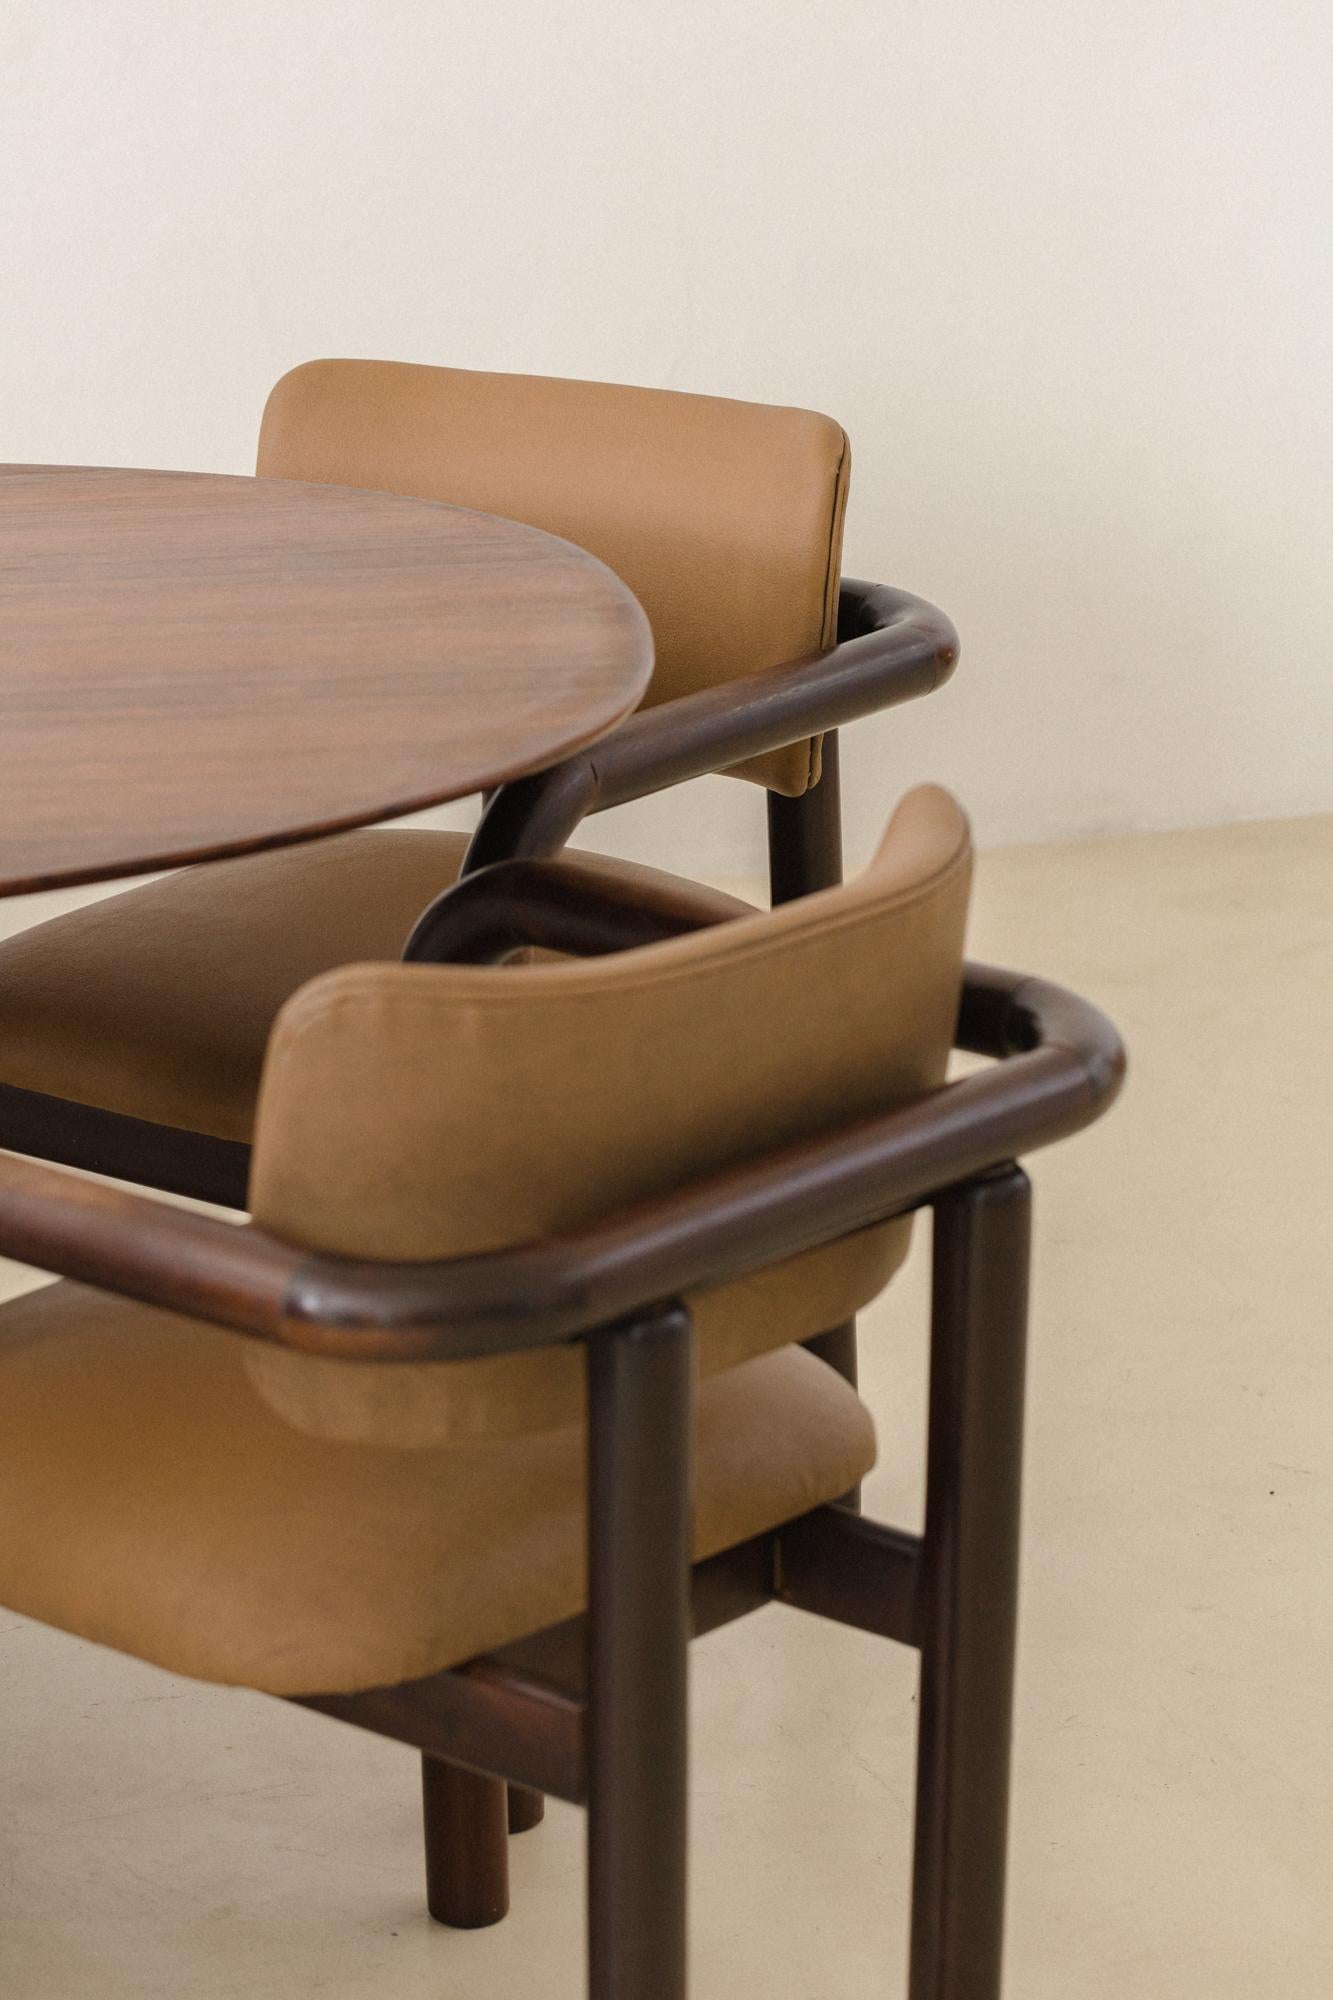 Brazilian Midcentury Dining Table in Rosewood, Unknown designer, 1960s For Sale 5